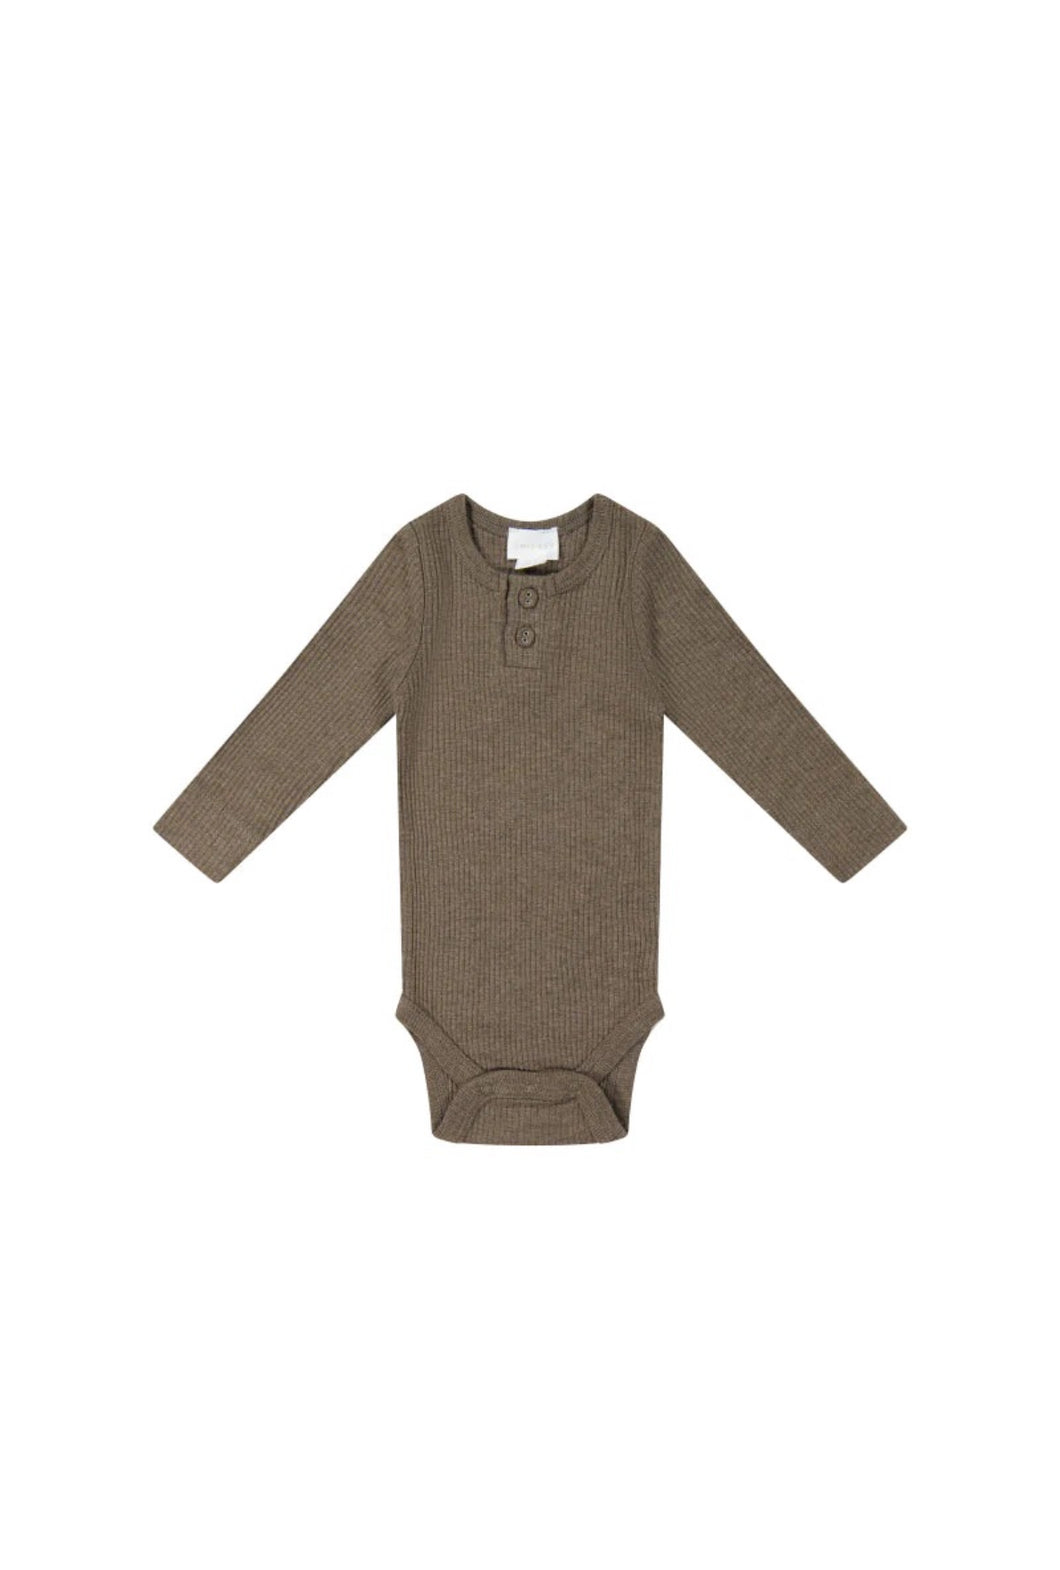 Ribbed Onesie in Cocoa